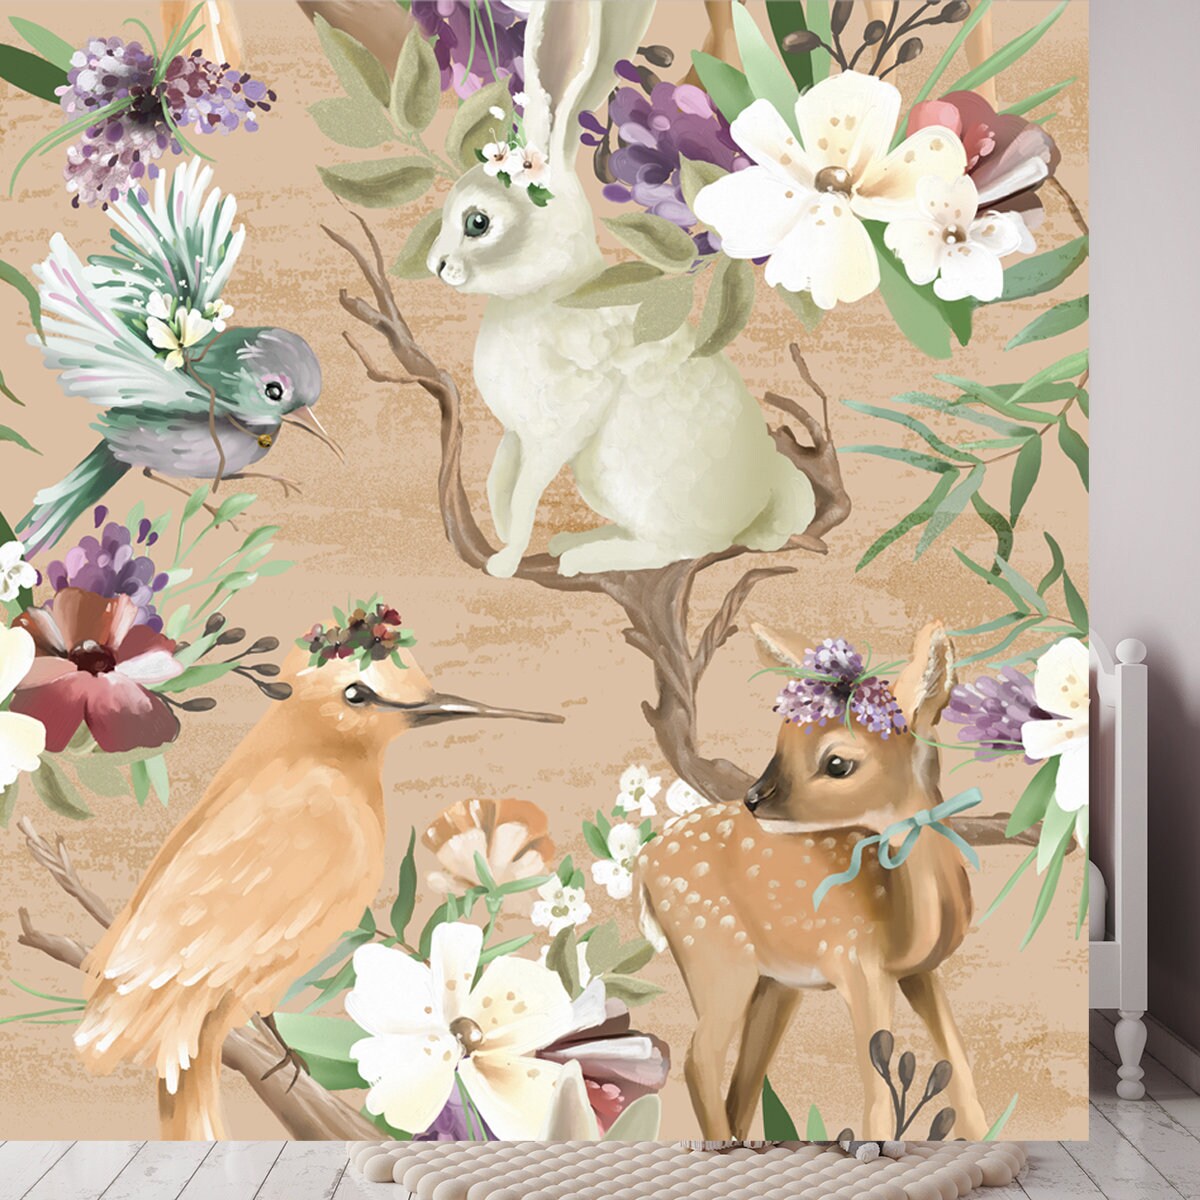 Beautiful, Vintage, Enchanted Woodland, Forest Animals and Birds with Flowers Wallpaper Girl Bedroom Mural